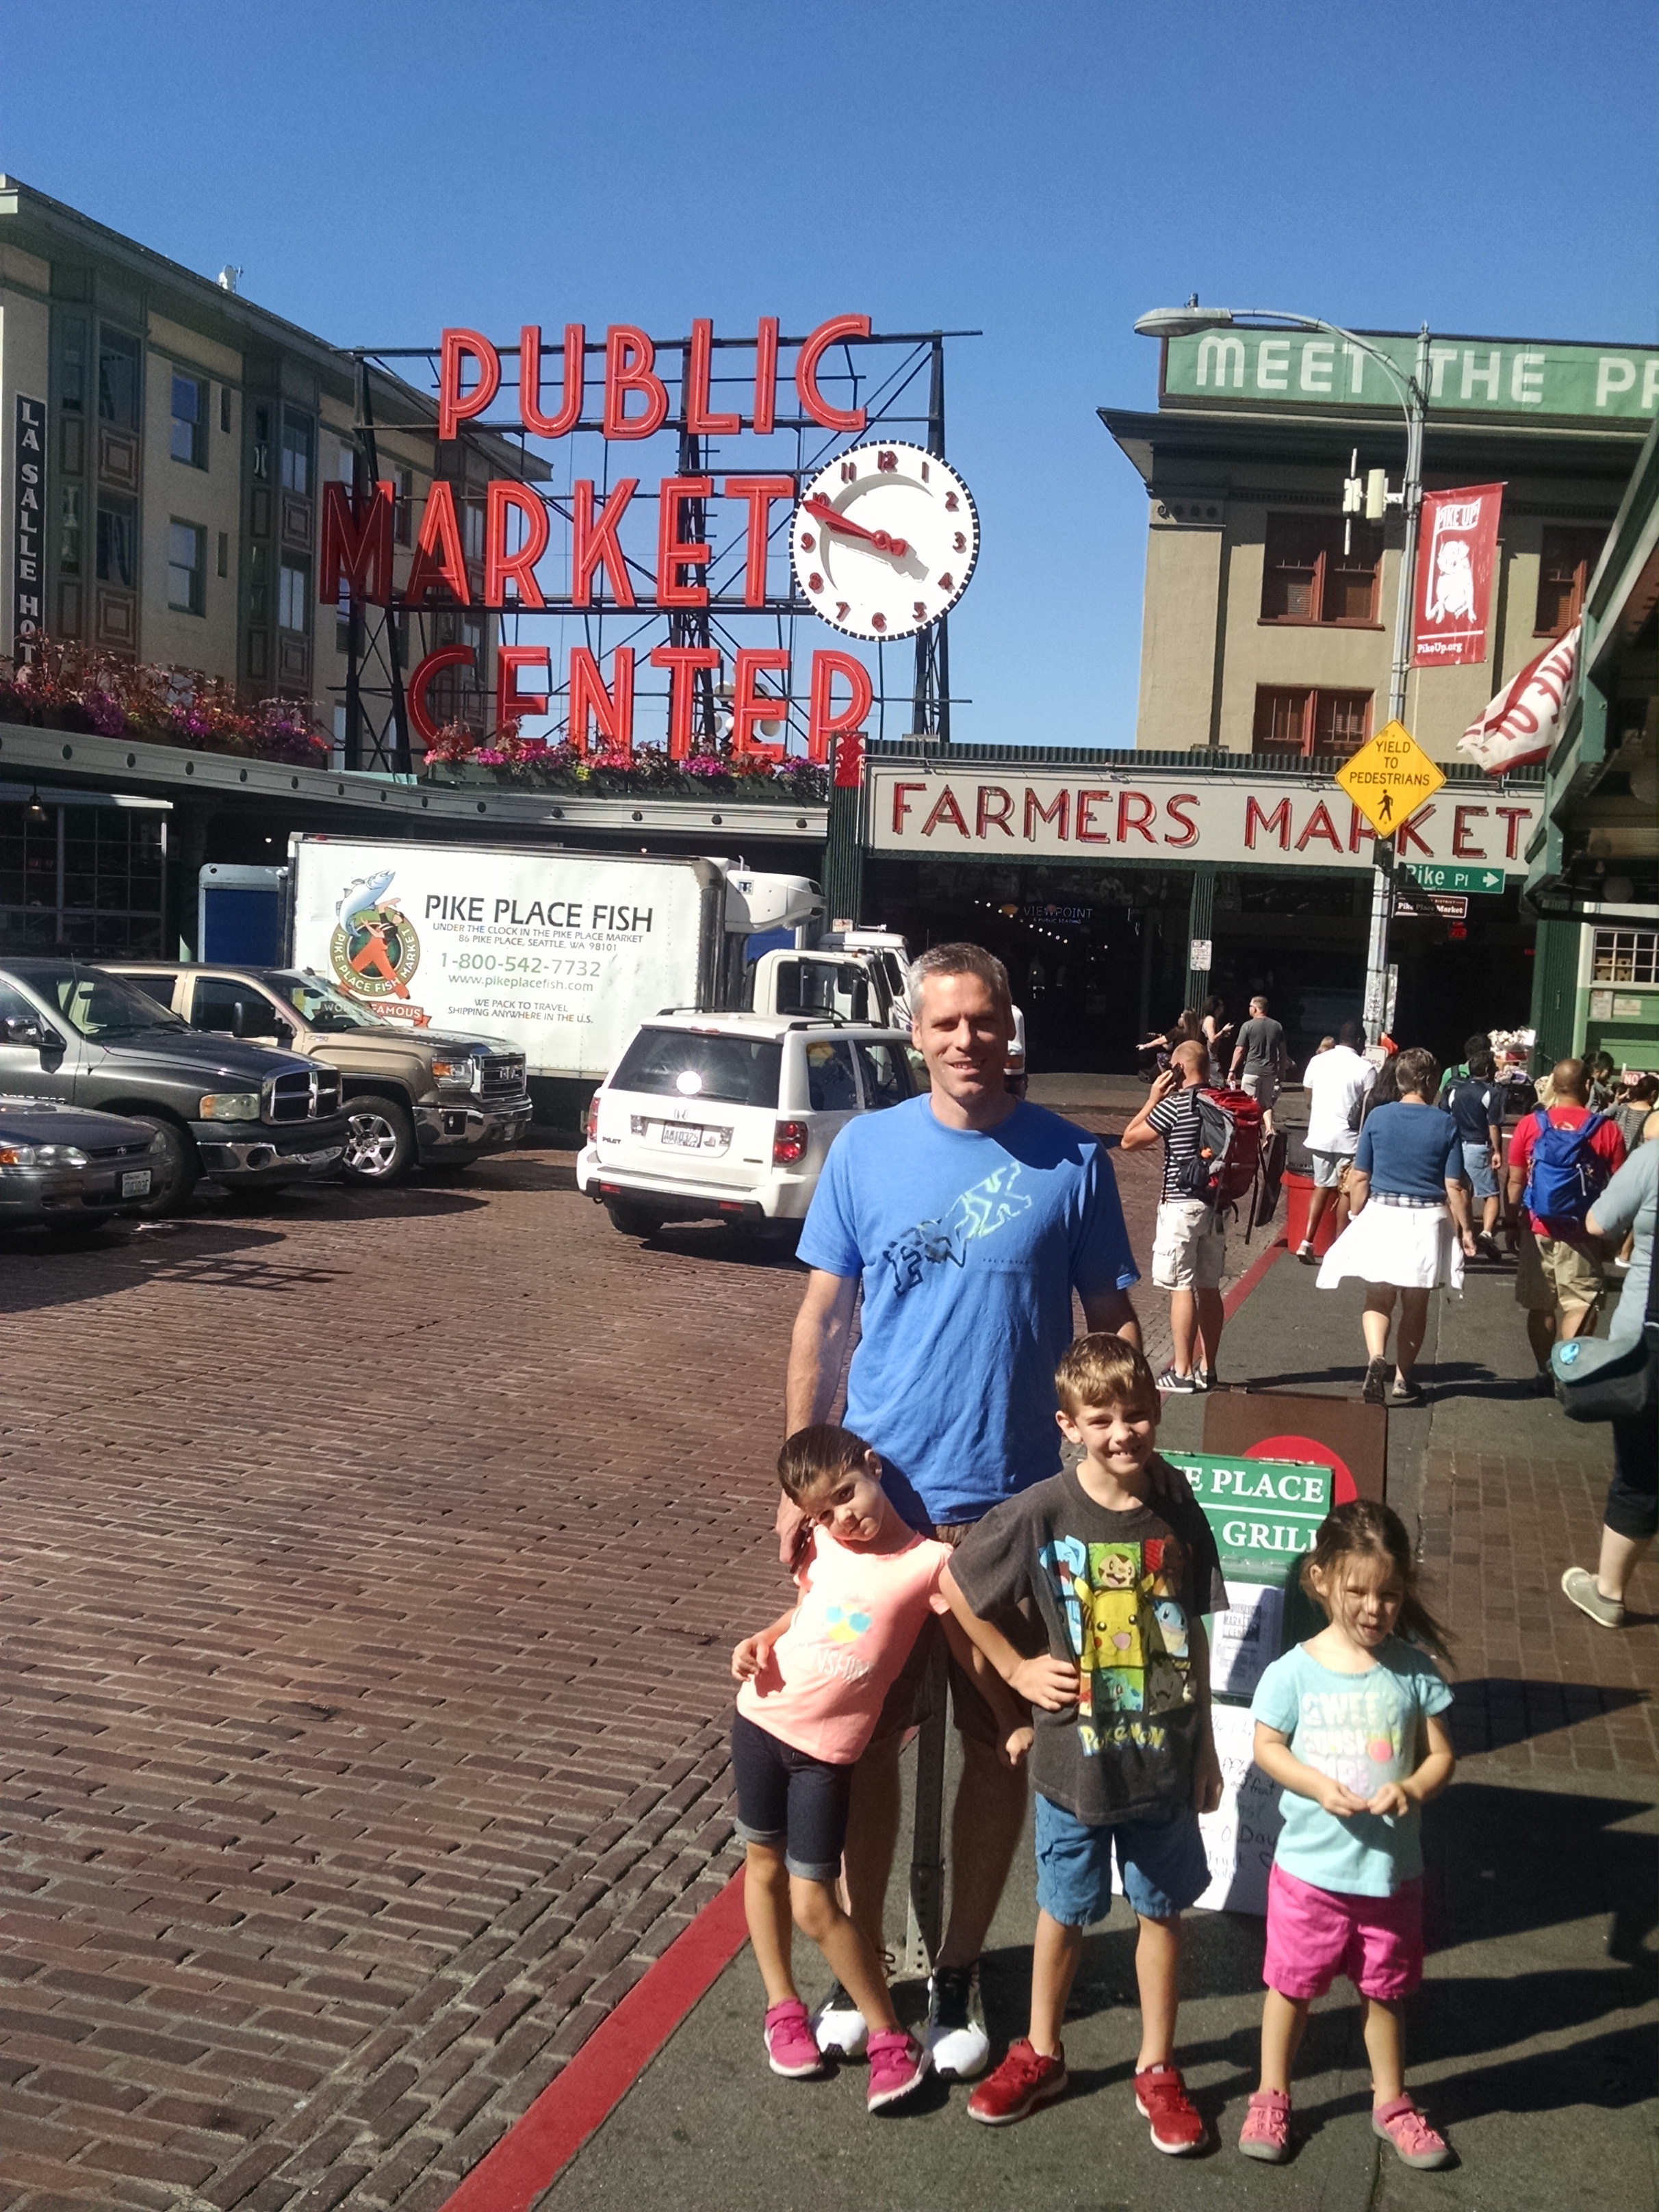 family in from of seattle's public market center or Pikes place